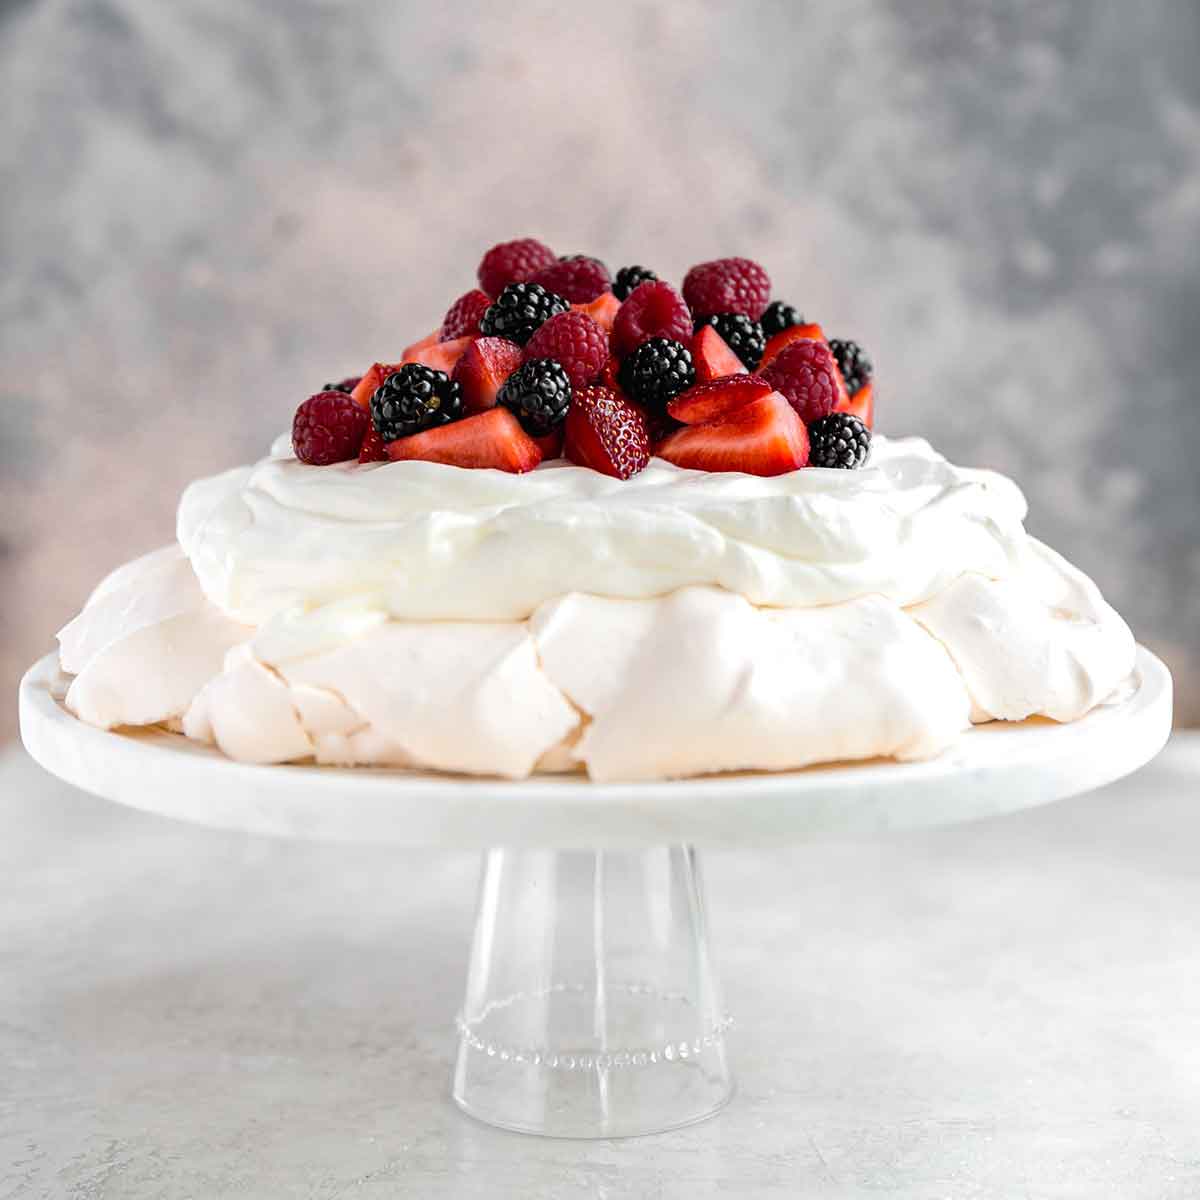 Pavlova topped with whipped cream and fresh berries, on a serving plate.